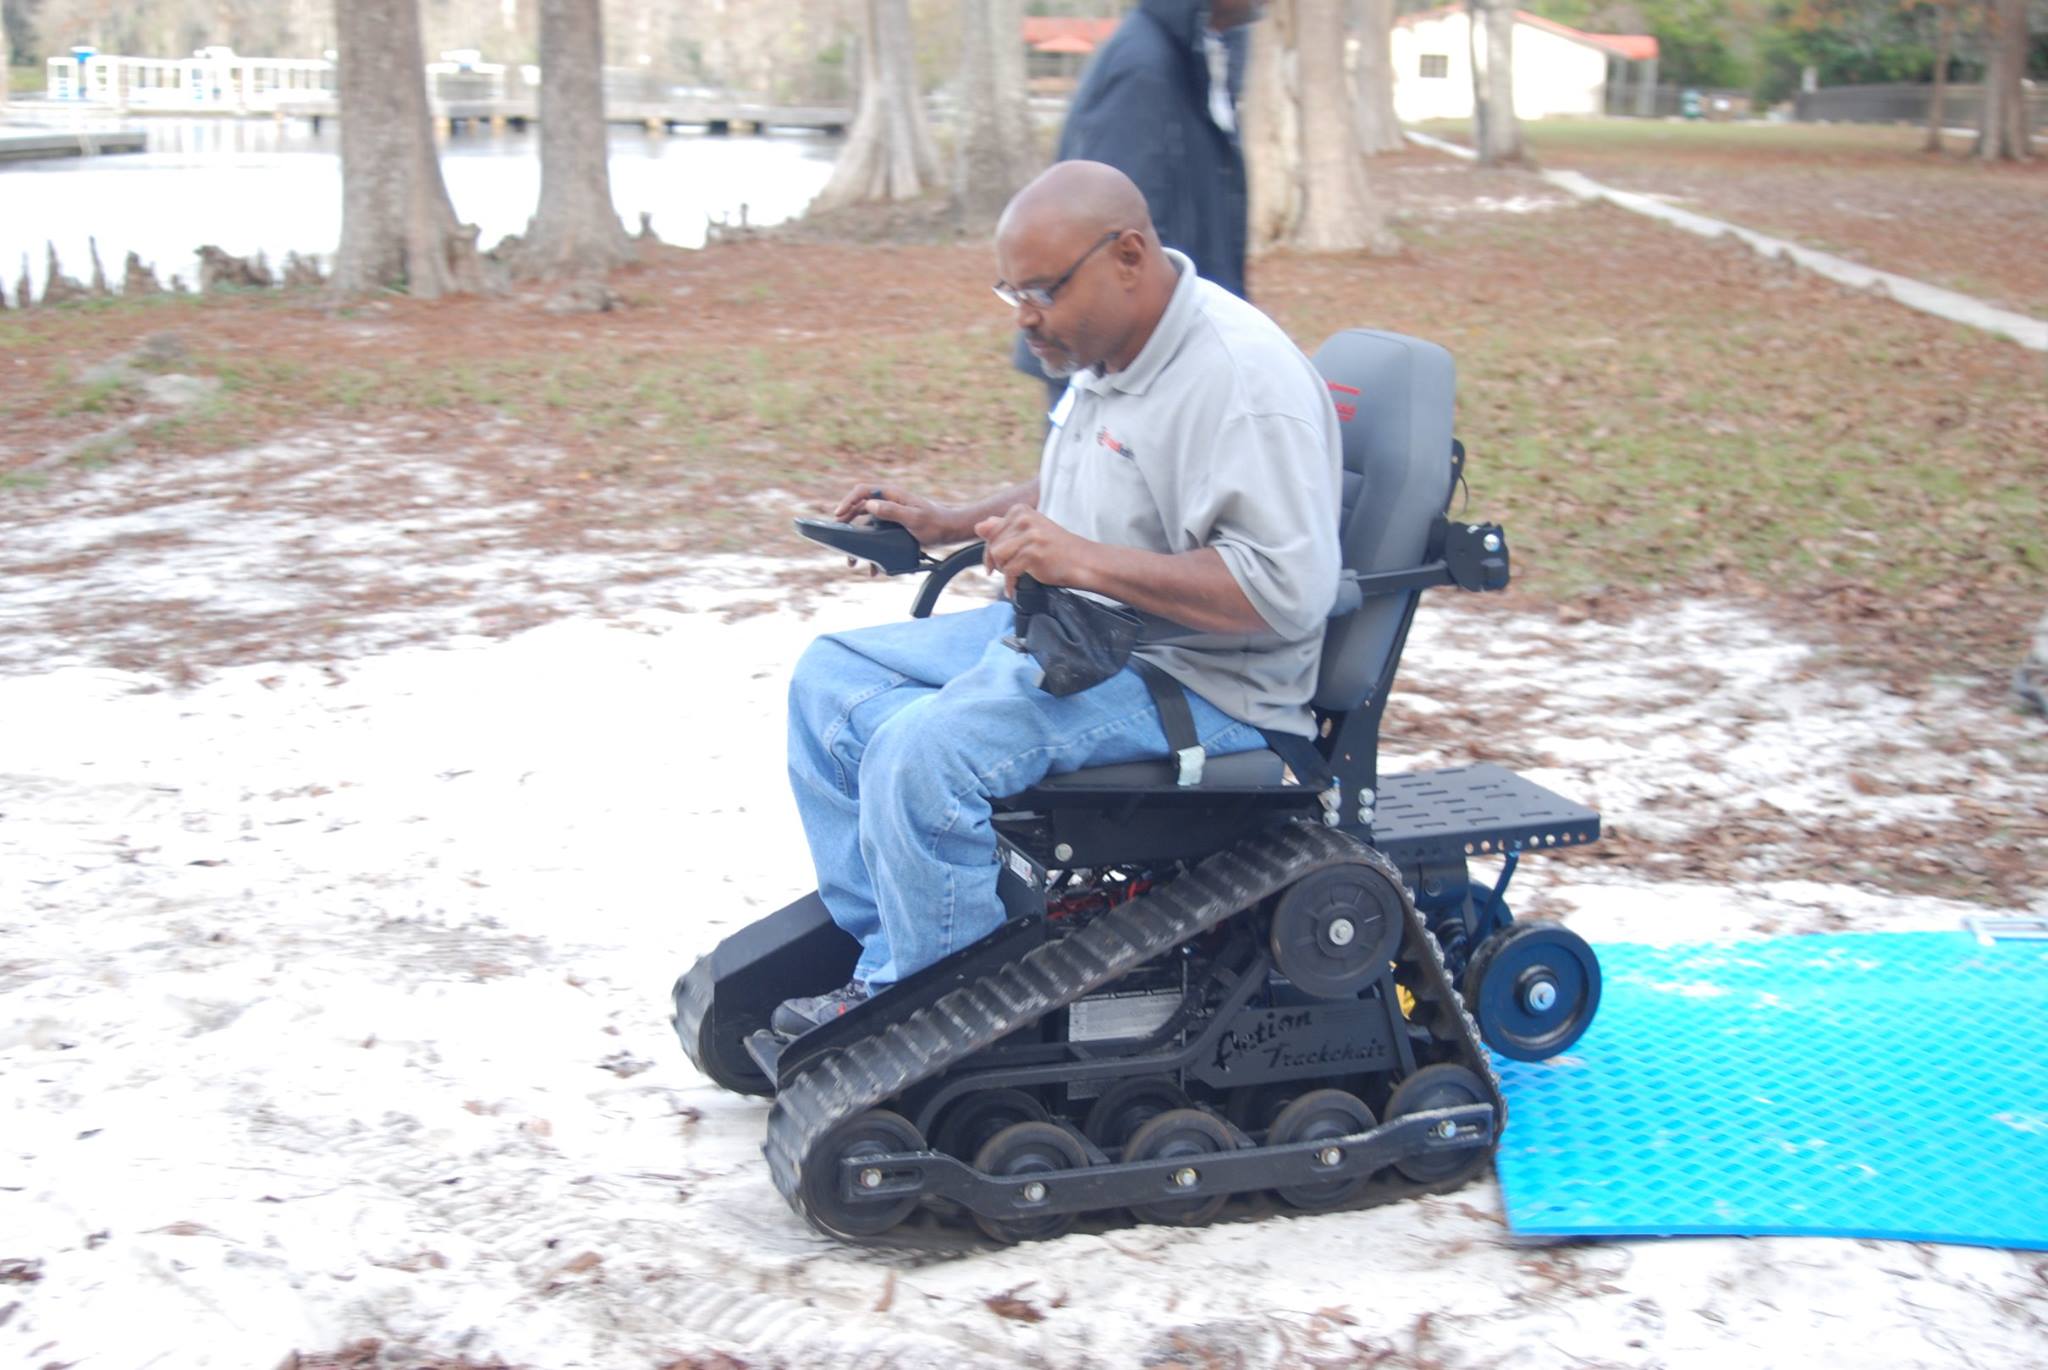 Cordell Jeter riding in a track chair